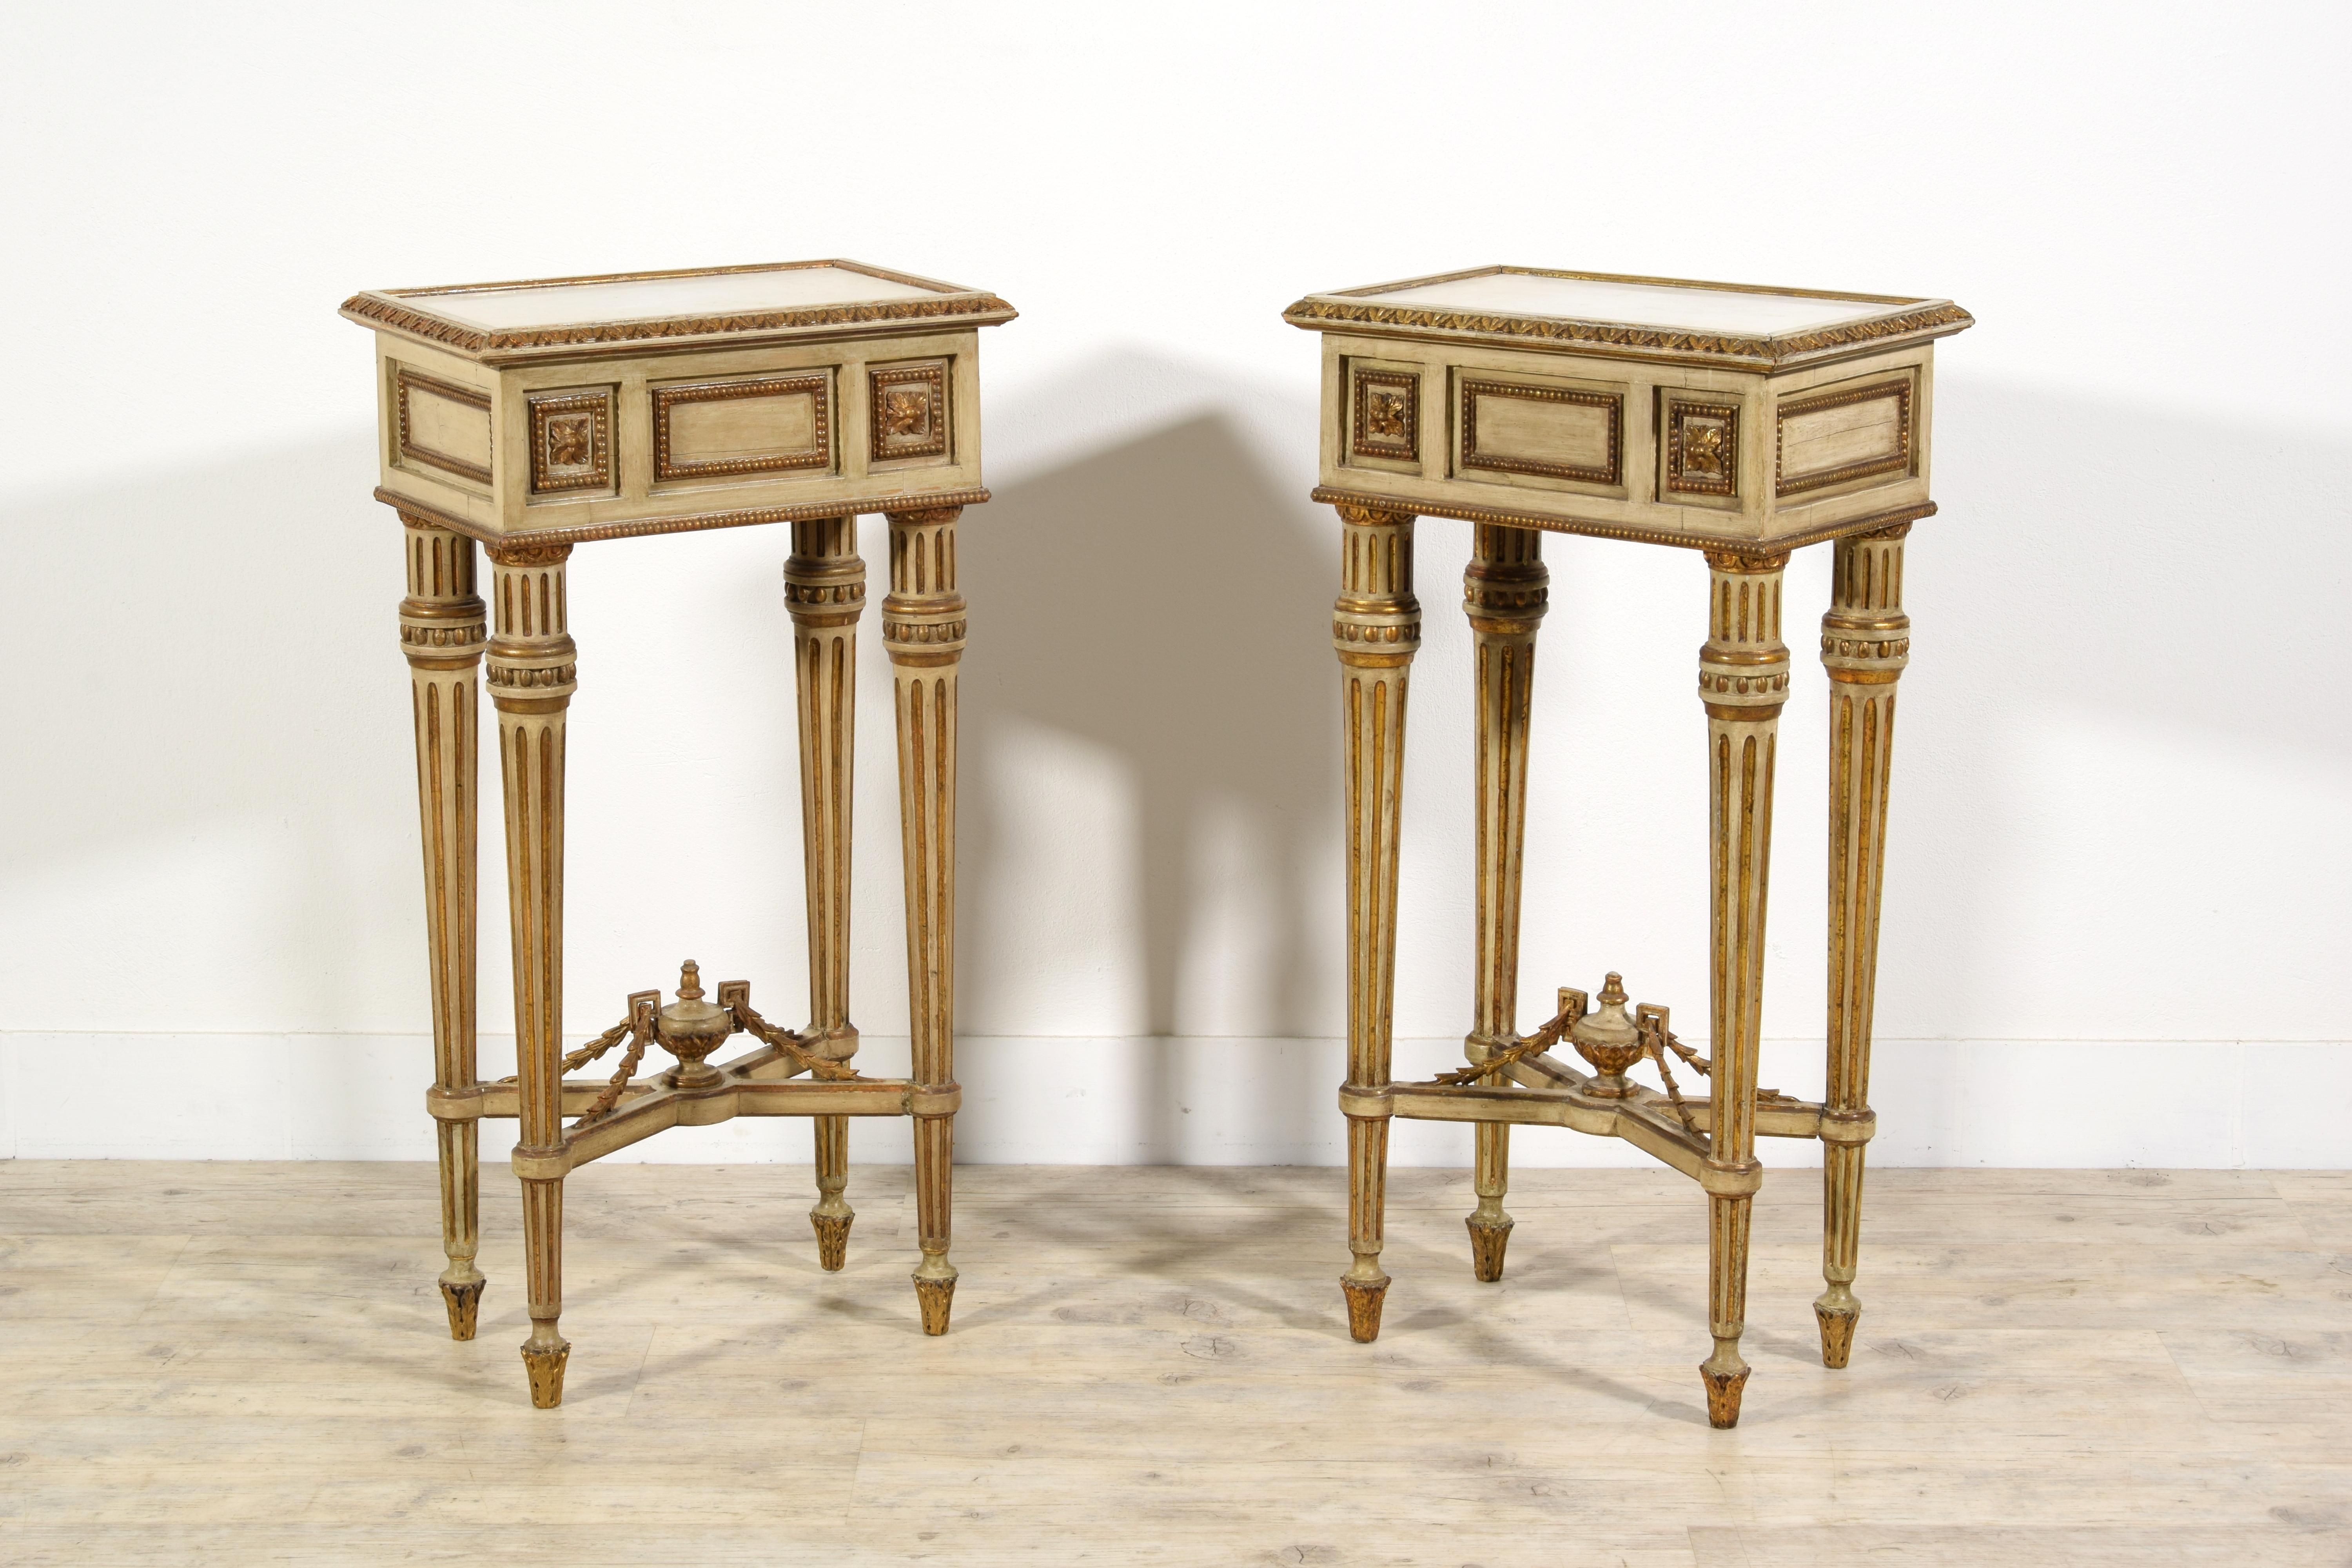 19th Century, Pair of Italian Louis XVI Style Lacquered Wood Central Tables 
This pair of side tables was made in Naples, Italy, in the late nineteenth century in the Louis XVI style.
The structure is in carved wood, lacquered and gilded mecca.
The